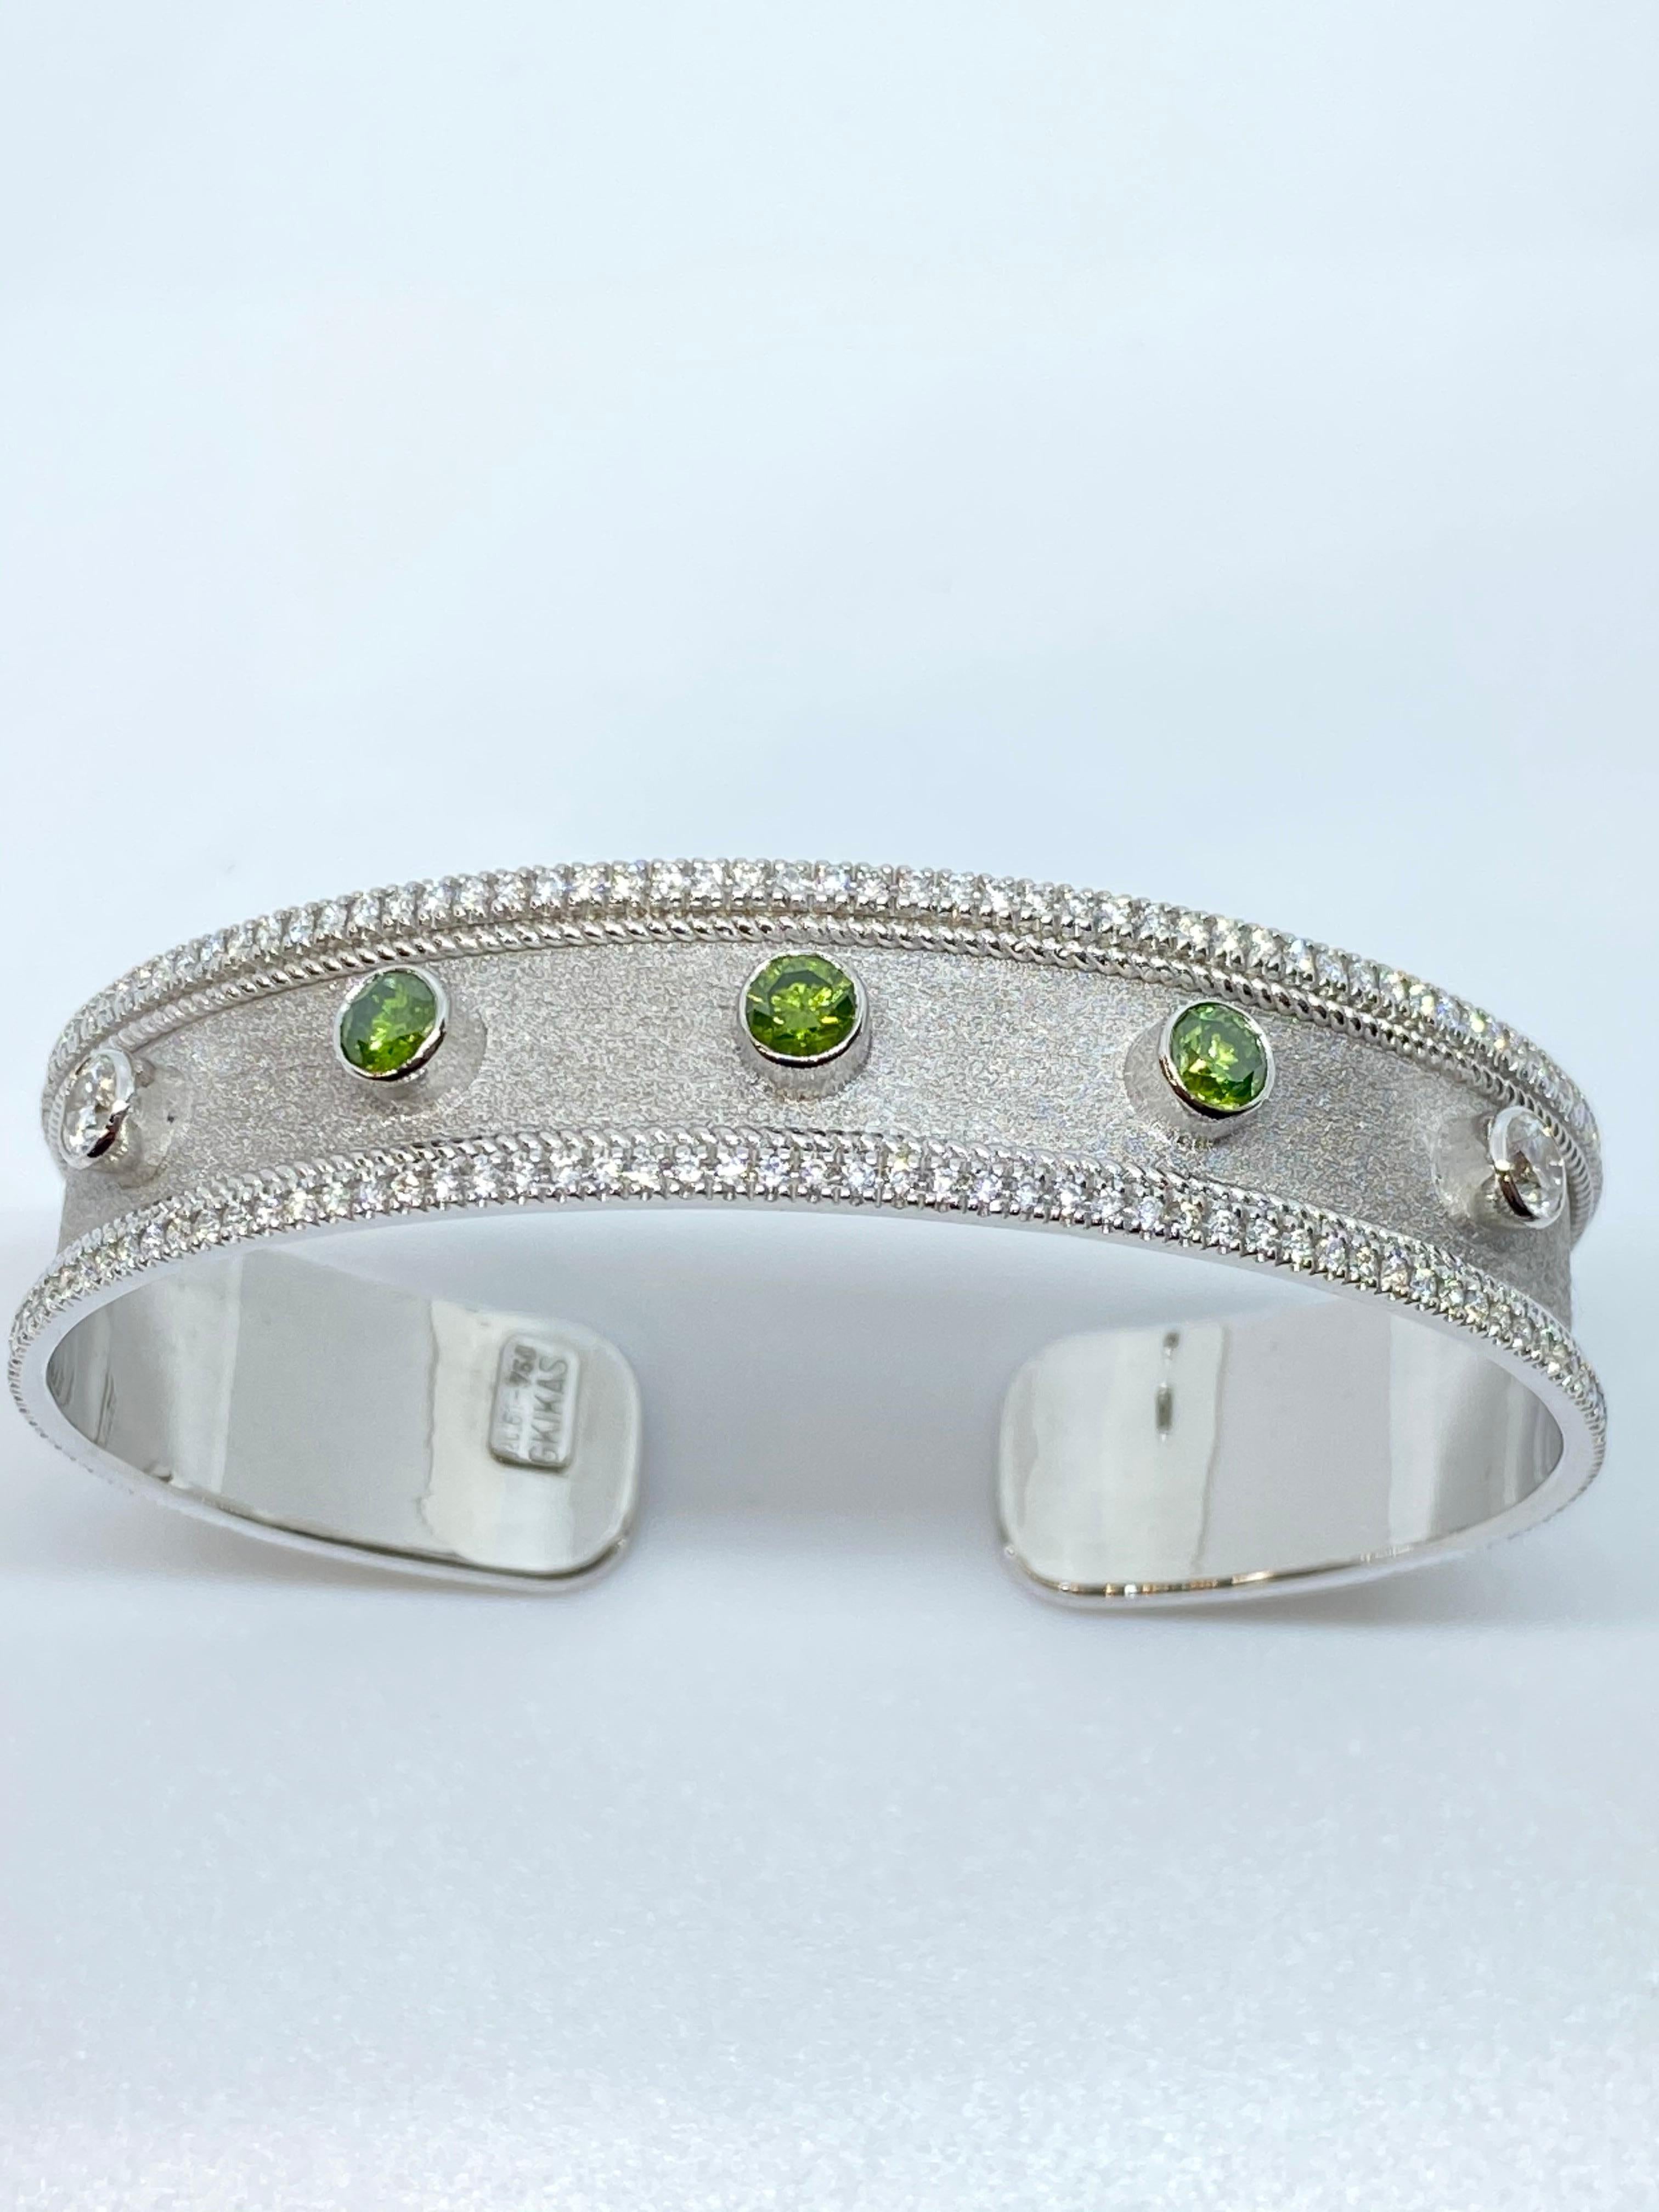 S.Georgios designer multicolor diamond cuff bracelet all handmade from solid 18 Karat White Gold and microscopically decorated with white gold granulation and a unique Byzantine velvet background. This gorgeous Bracelet features in the center 3